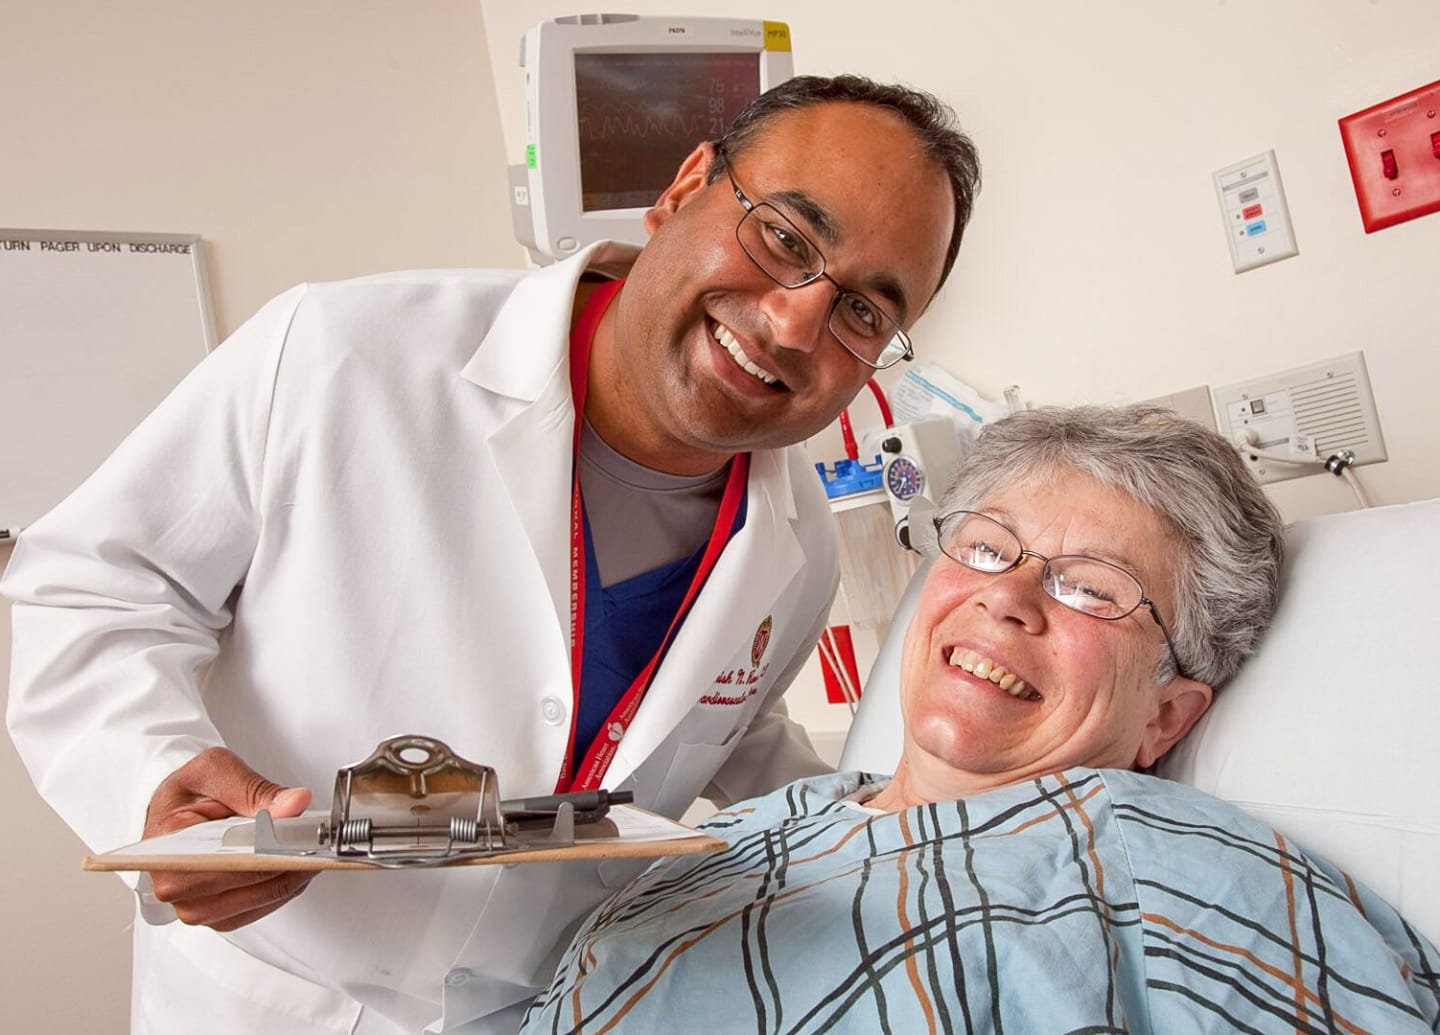 A physician leaning over a smiling patient in a hospital bed